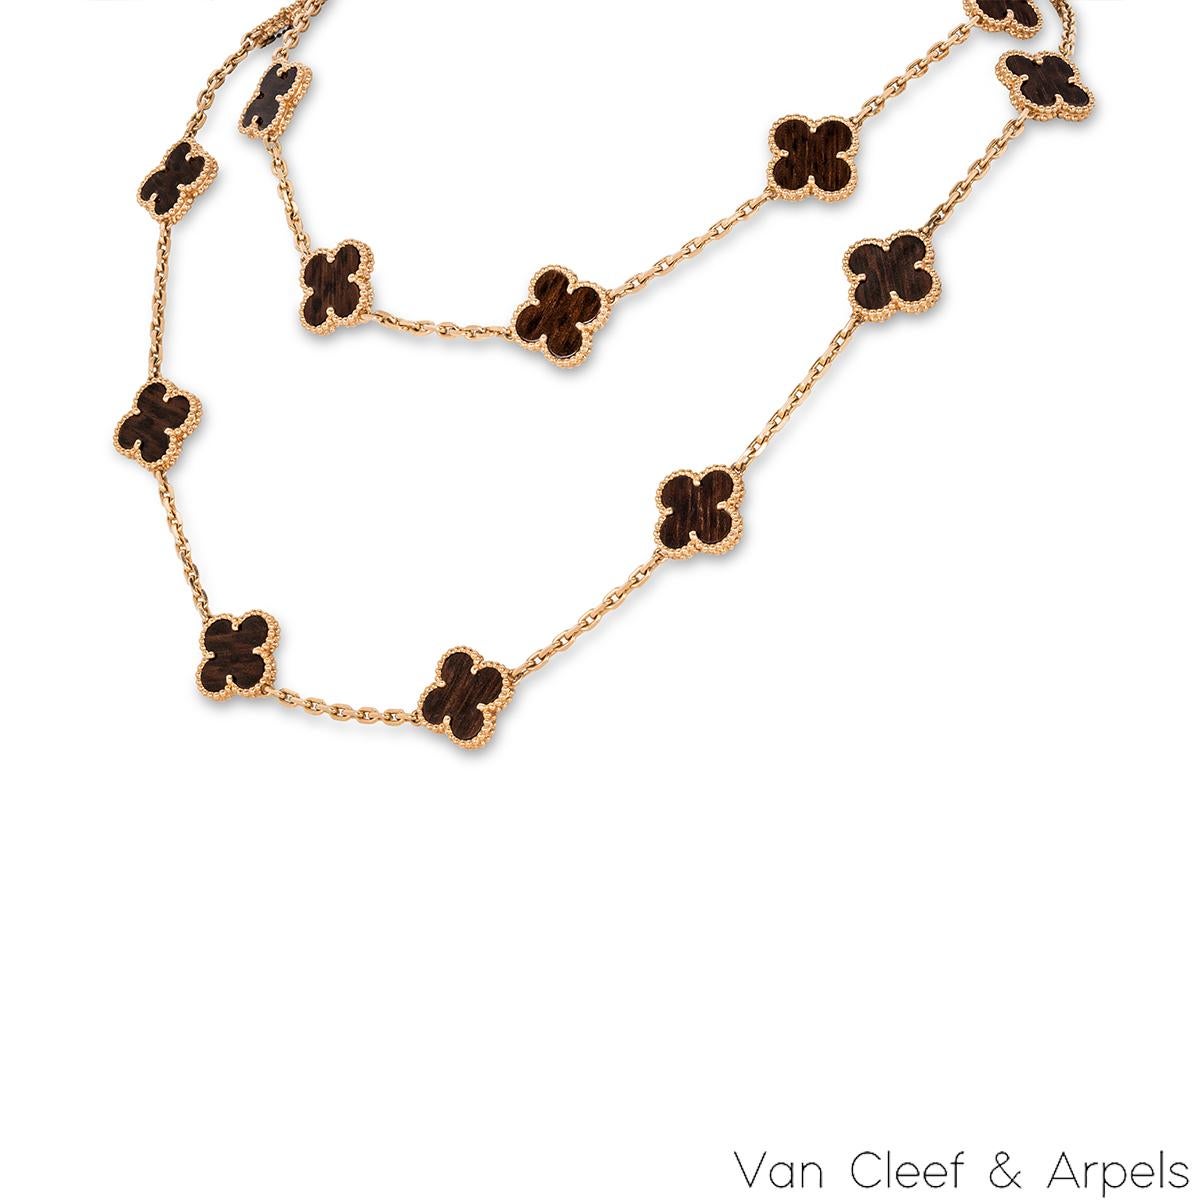 An exquisite 18k rose gold letterwood necklace by Van Cleef and Arpels from the Vintage Alhambra collection. The necklace comprises of 20 iconic 4 leaf clover motifs, each set with a beaded edge and a letterwood inlay. The necklace measures 33.8